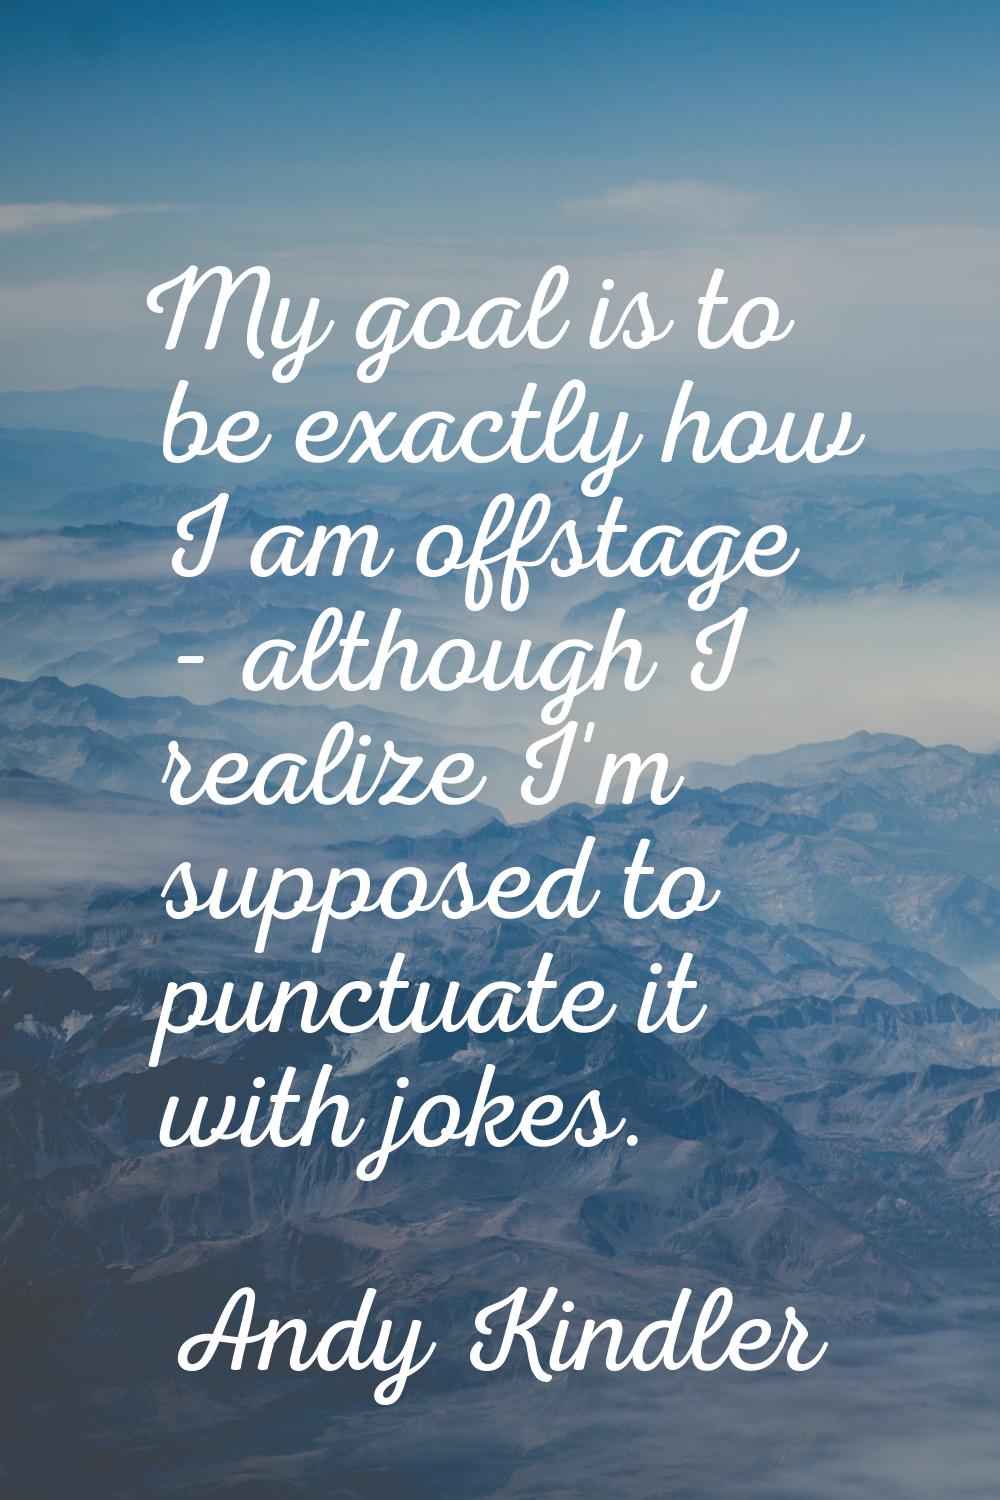 My goal is to be exactly how I am offstage - although I realize I'm supposed to punctuate it with j